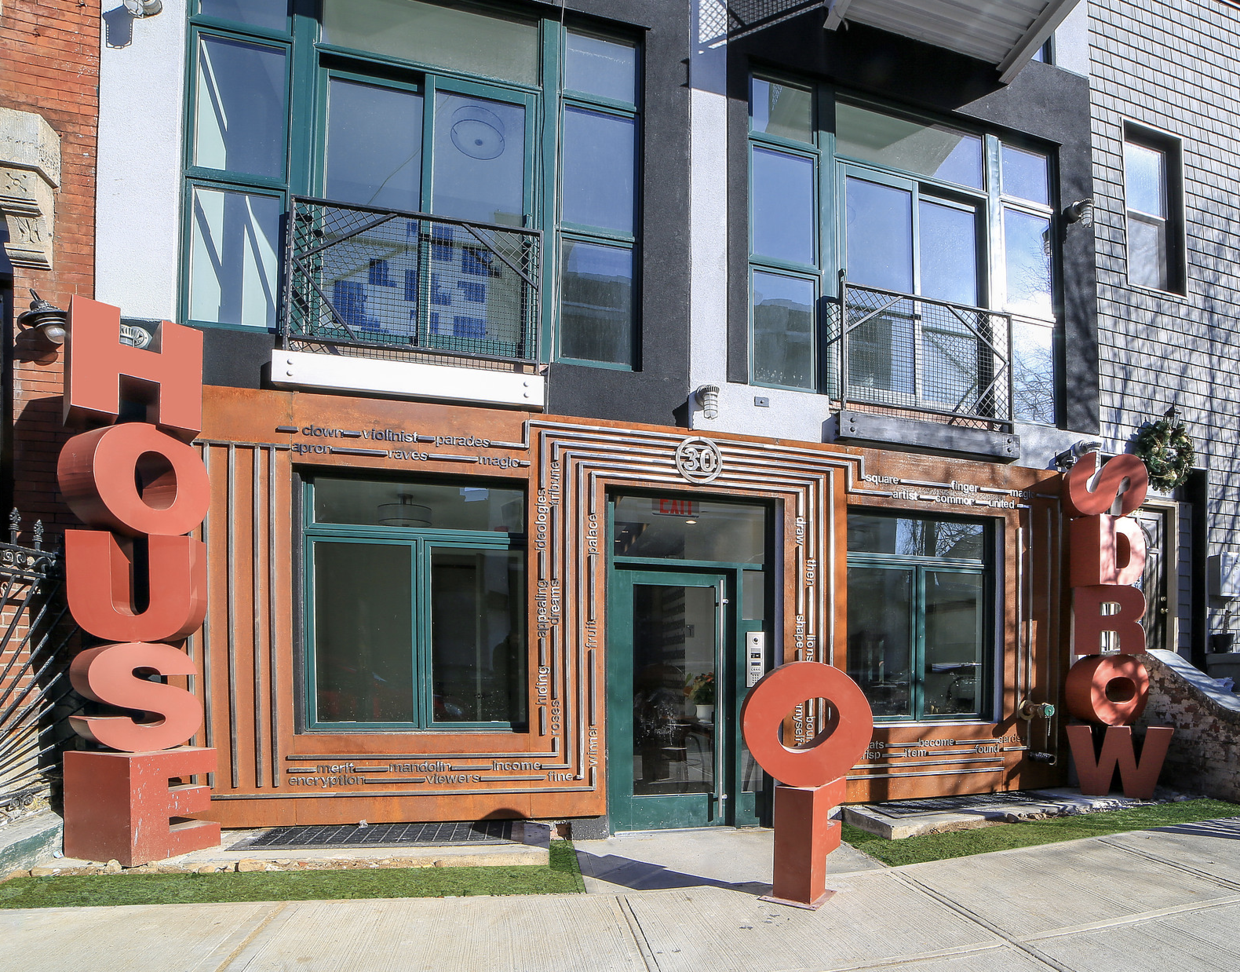 A New Building in Bushwick Combines Two Neighborhood Themes: Art and Pricy Apartments